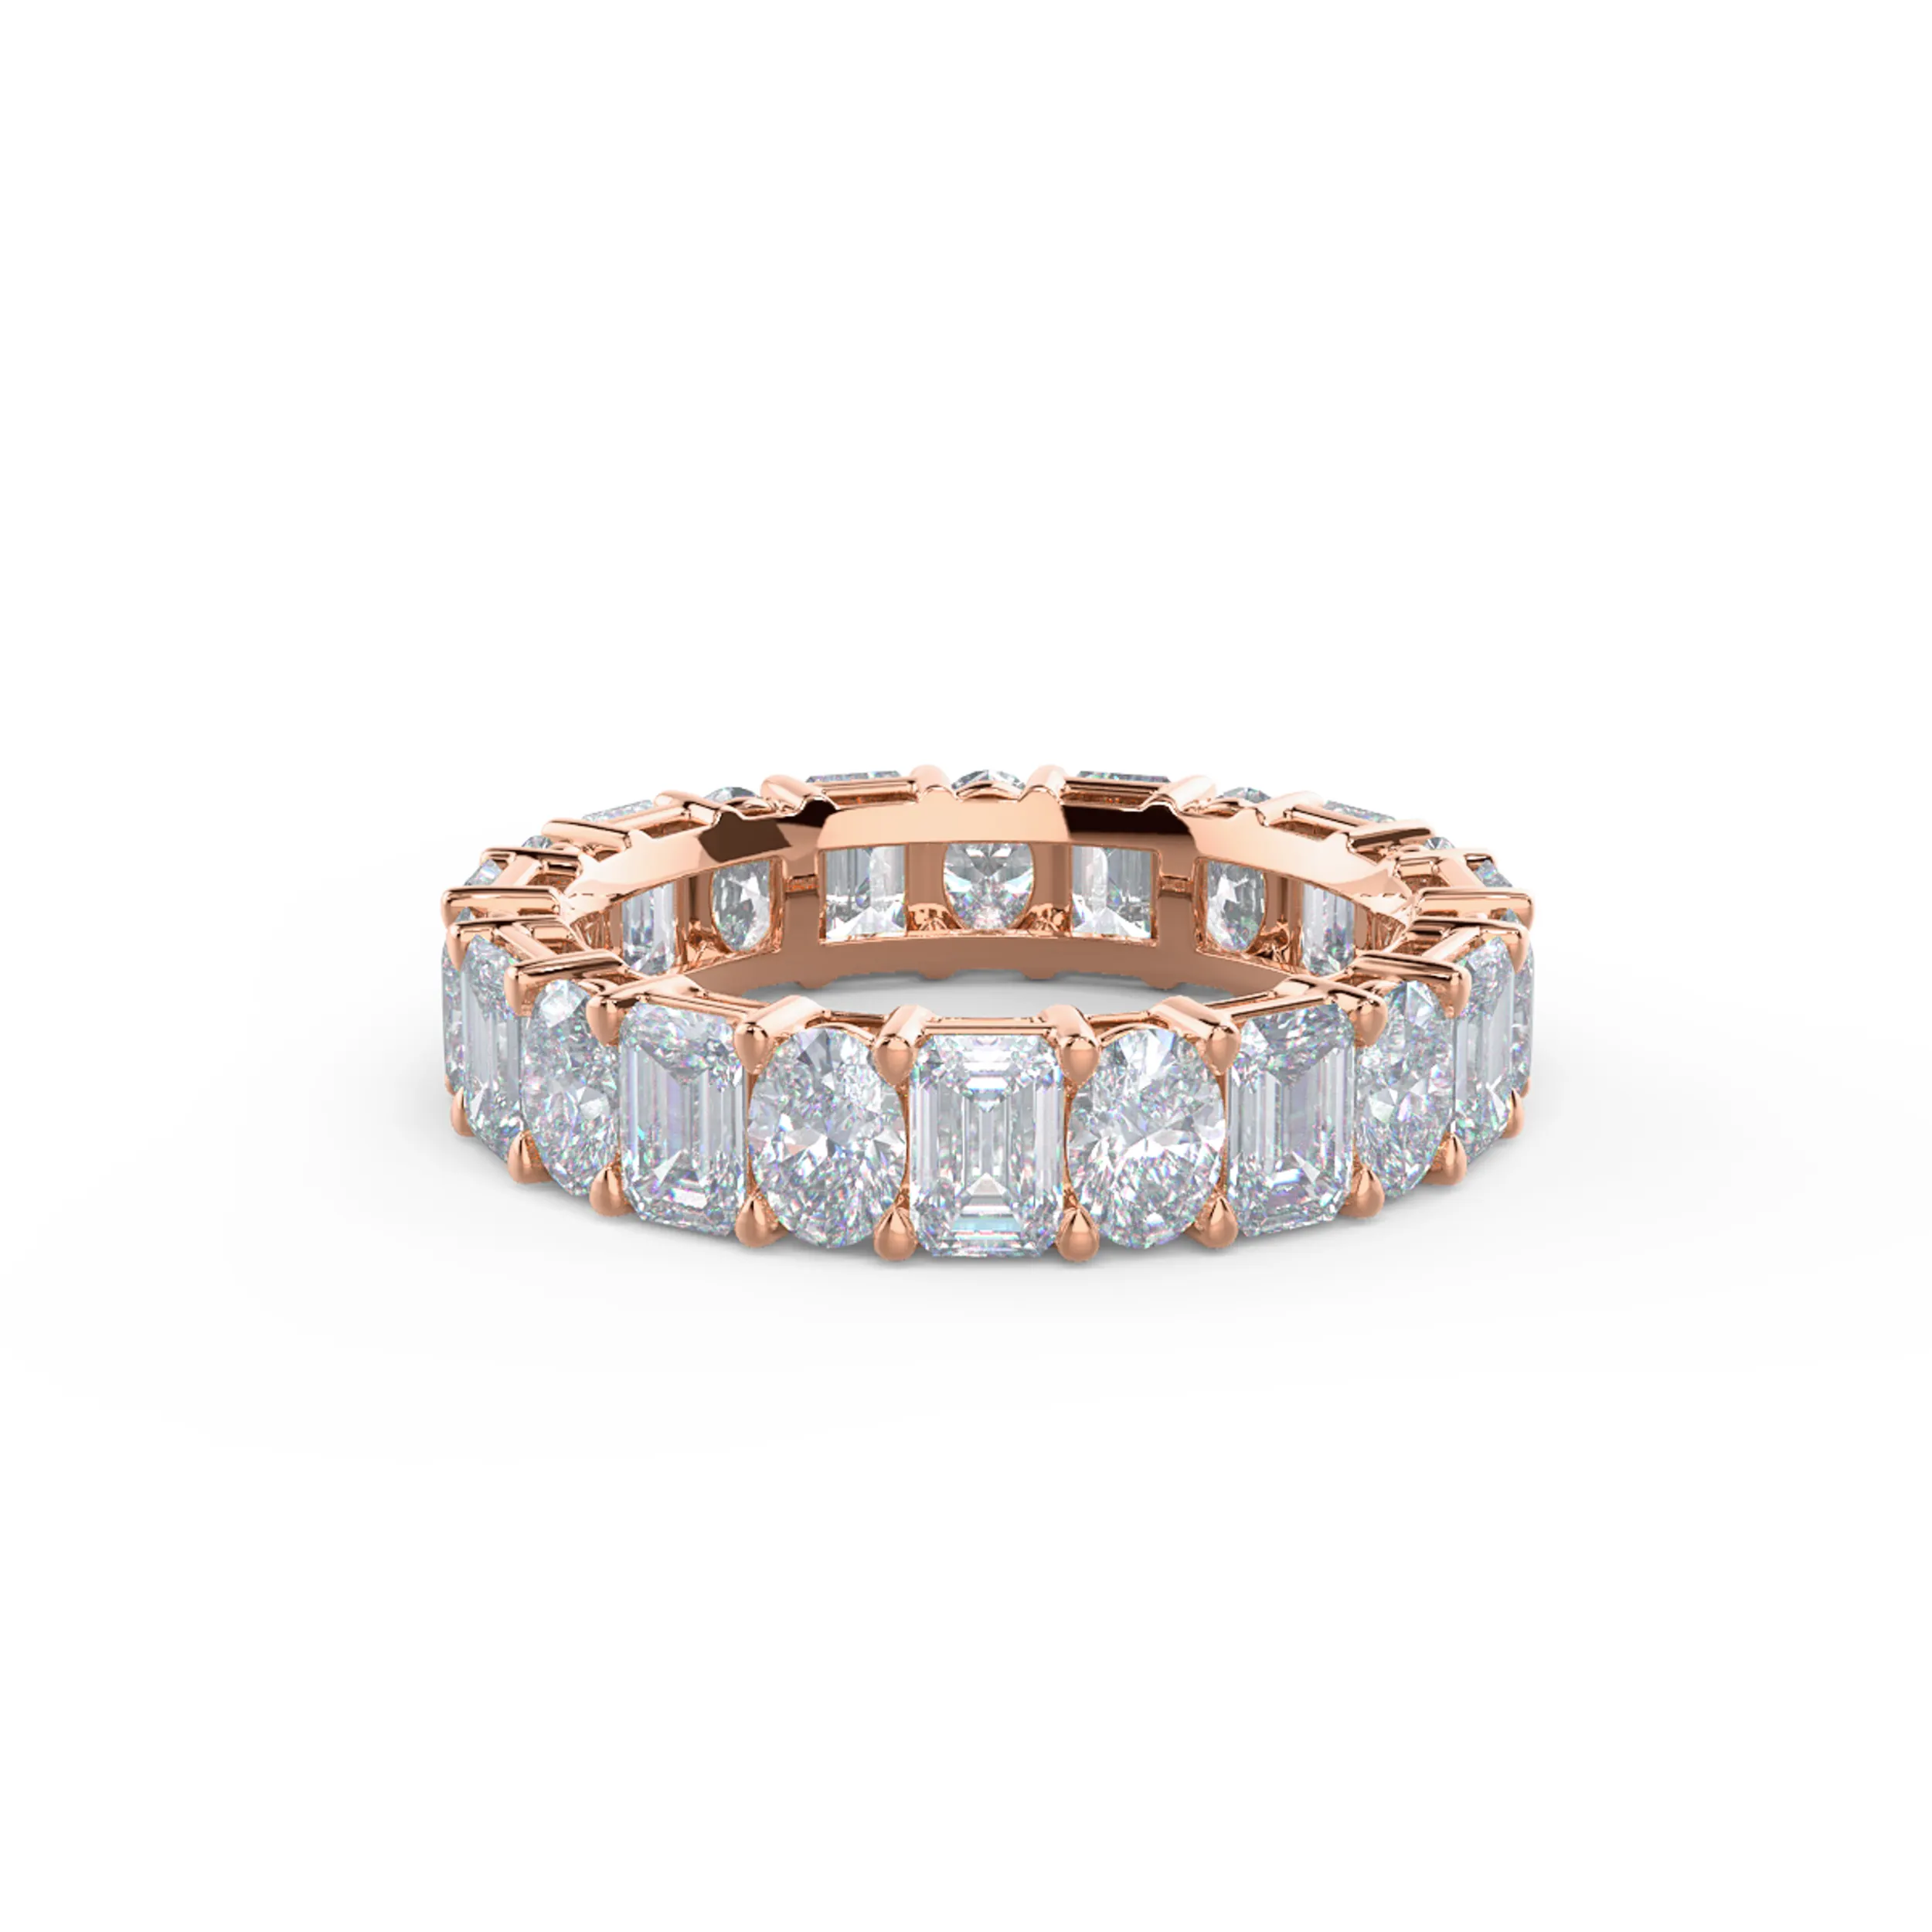 5.5 Carat Diamonds set in 14kt Rose Gold Emerald and Oval Eternity Band (Main View)